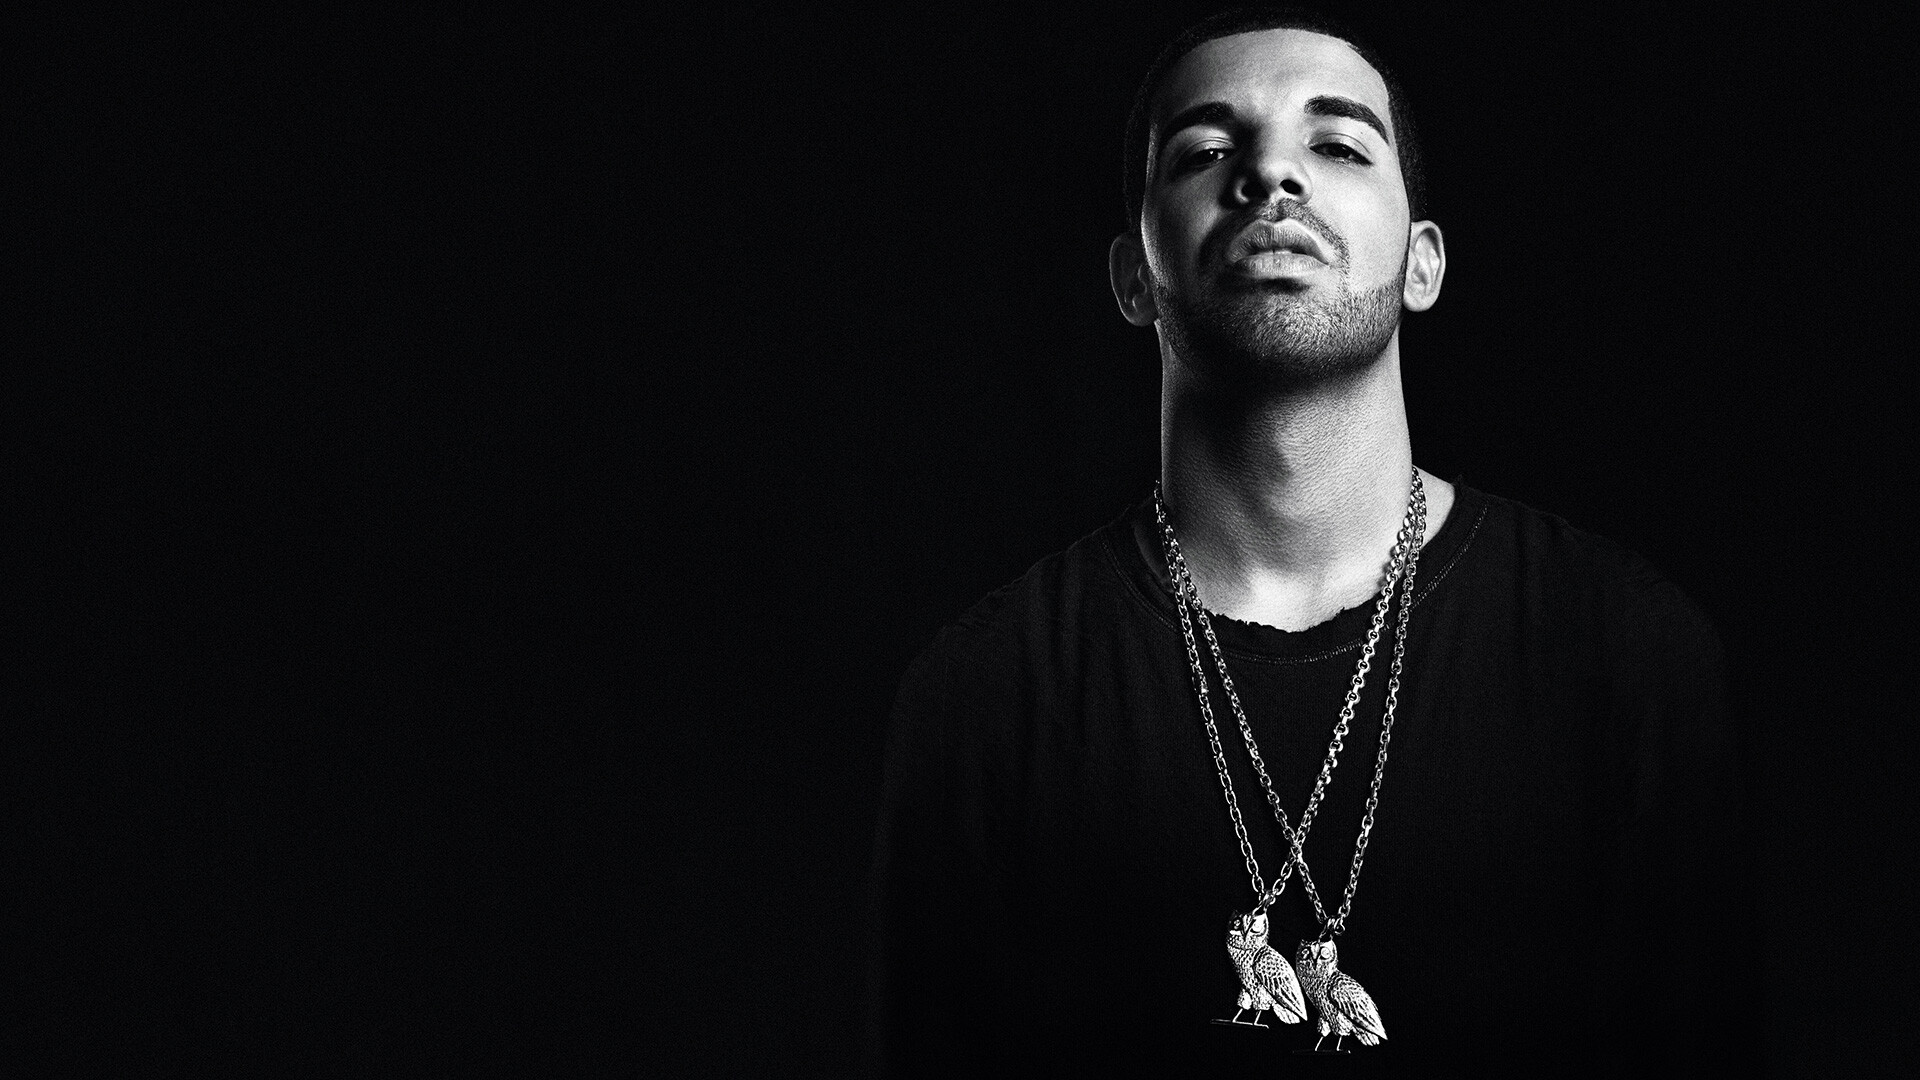 Drake: A multi-award winning rapper, Co-founded the production company DreamCrew. 1920x1080 Full HD Wallpaper.